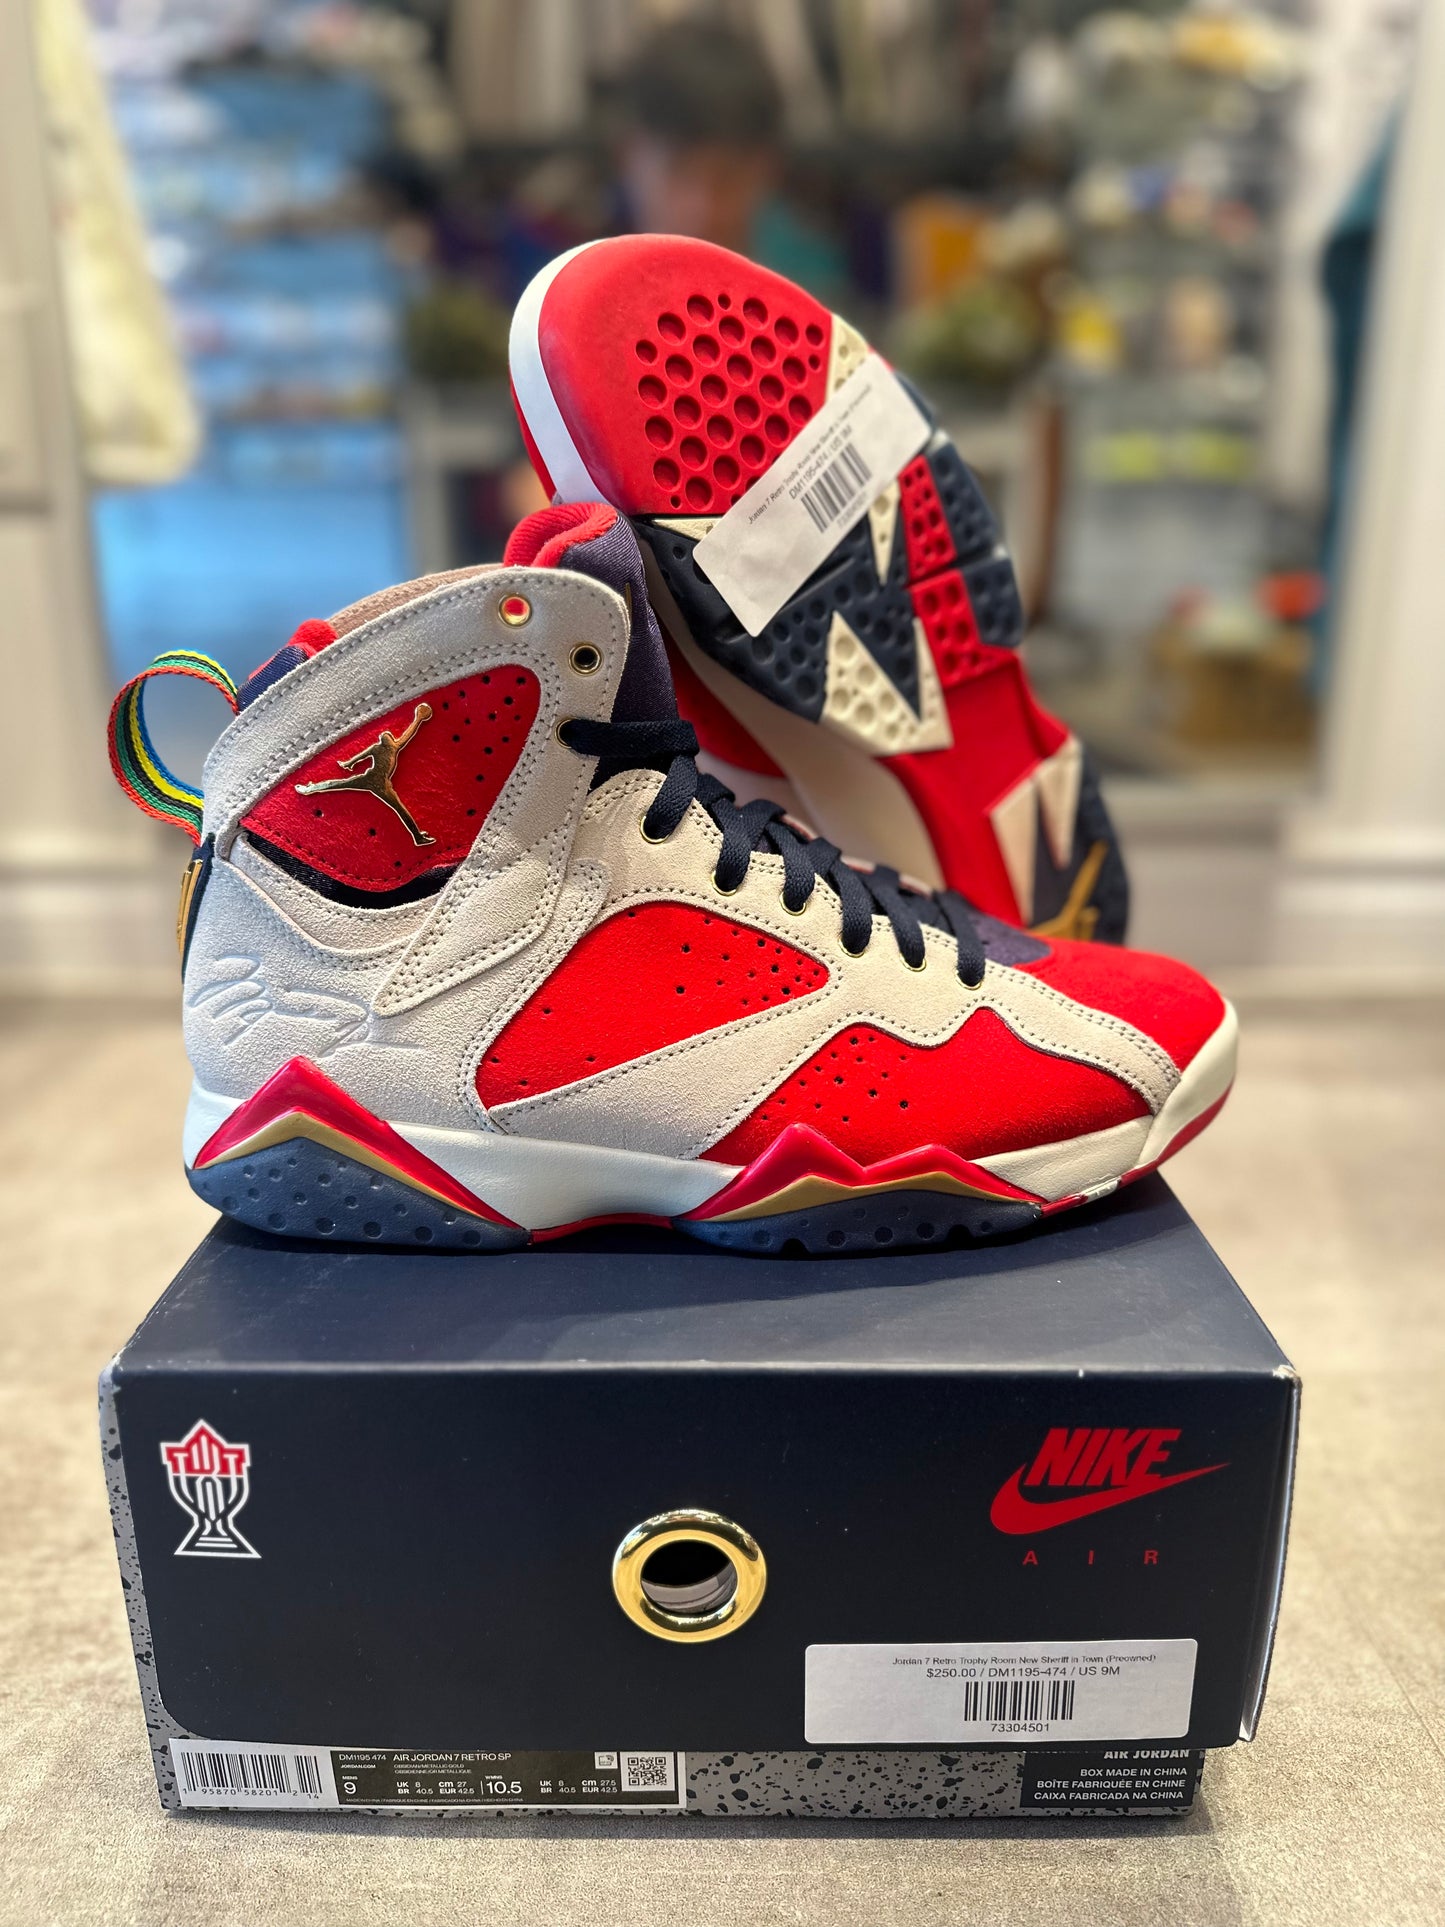 Jordan 7 Retro Trophy Room New Sheriff in Town (Preowned)